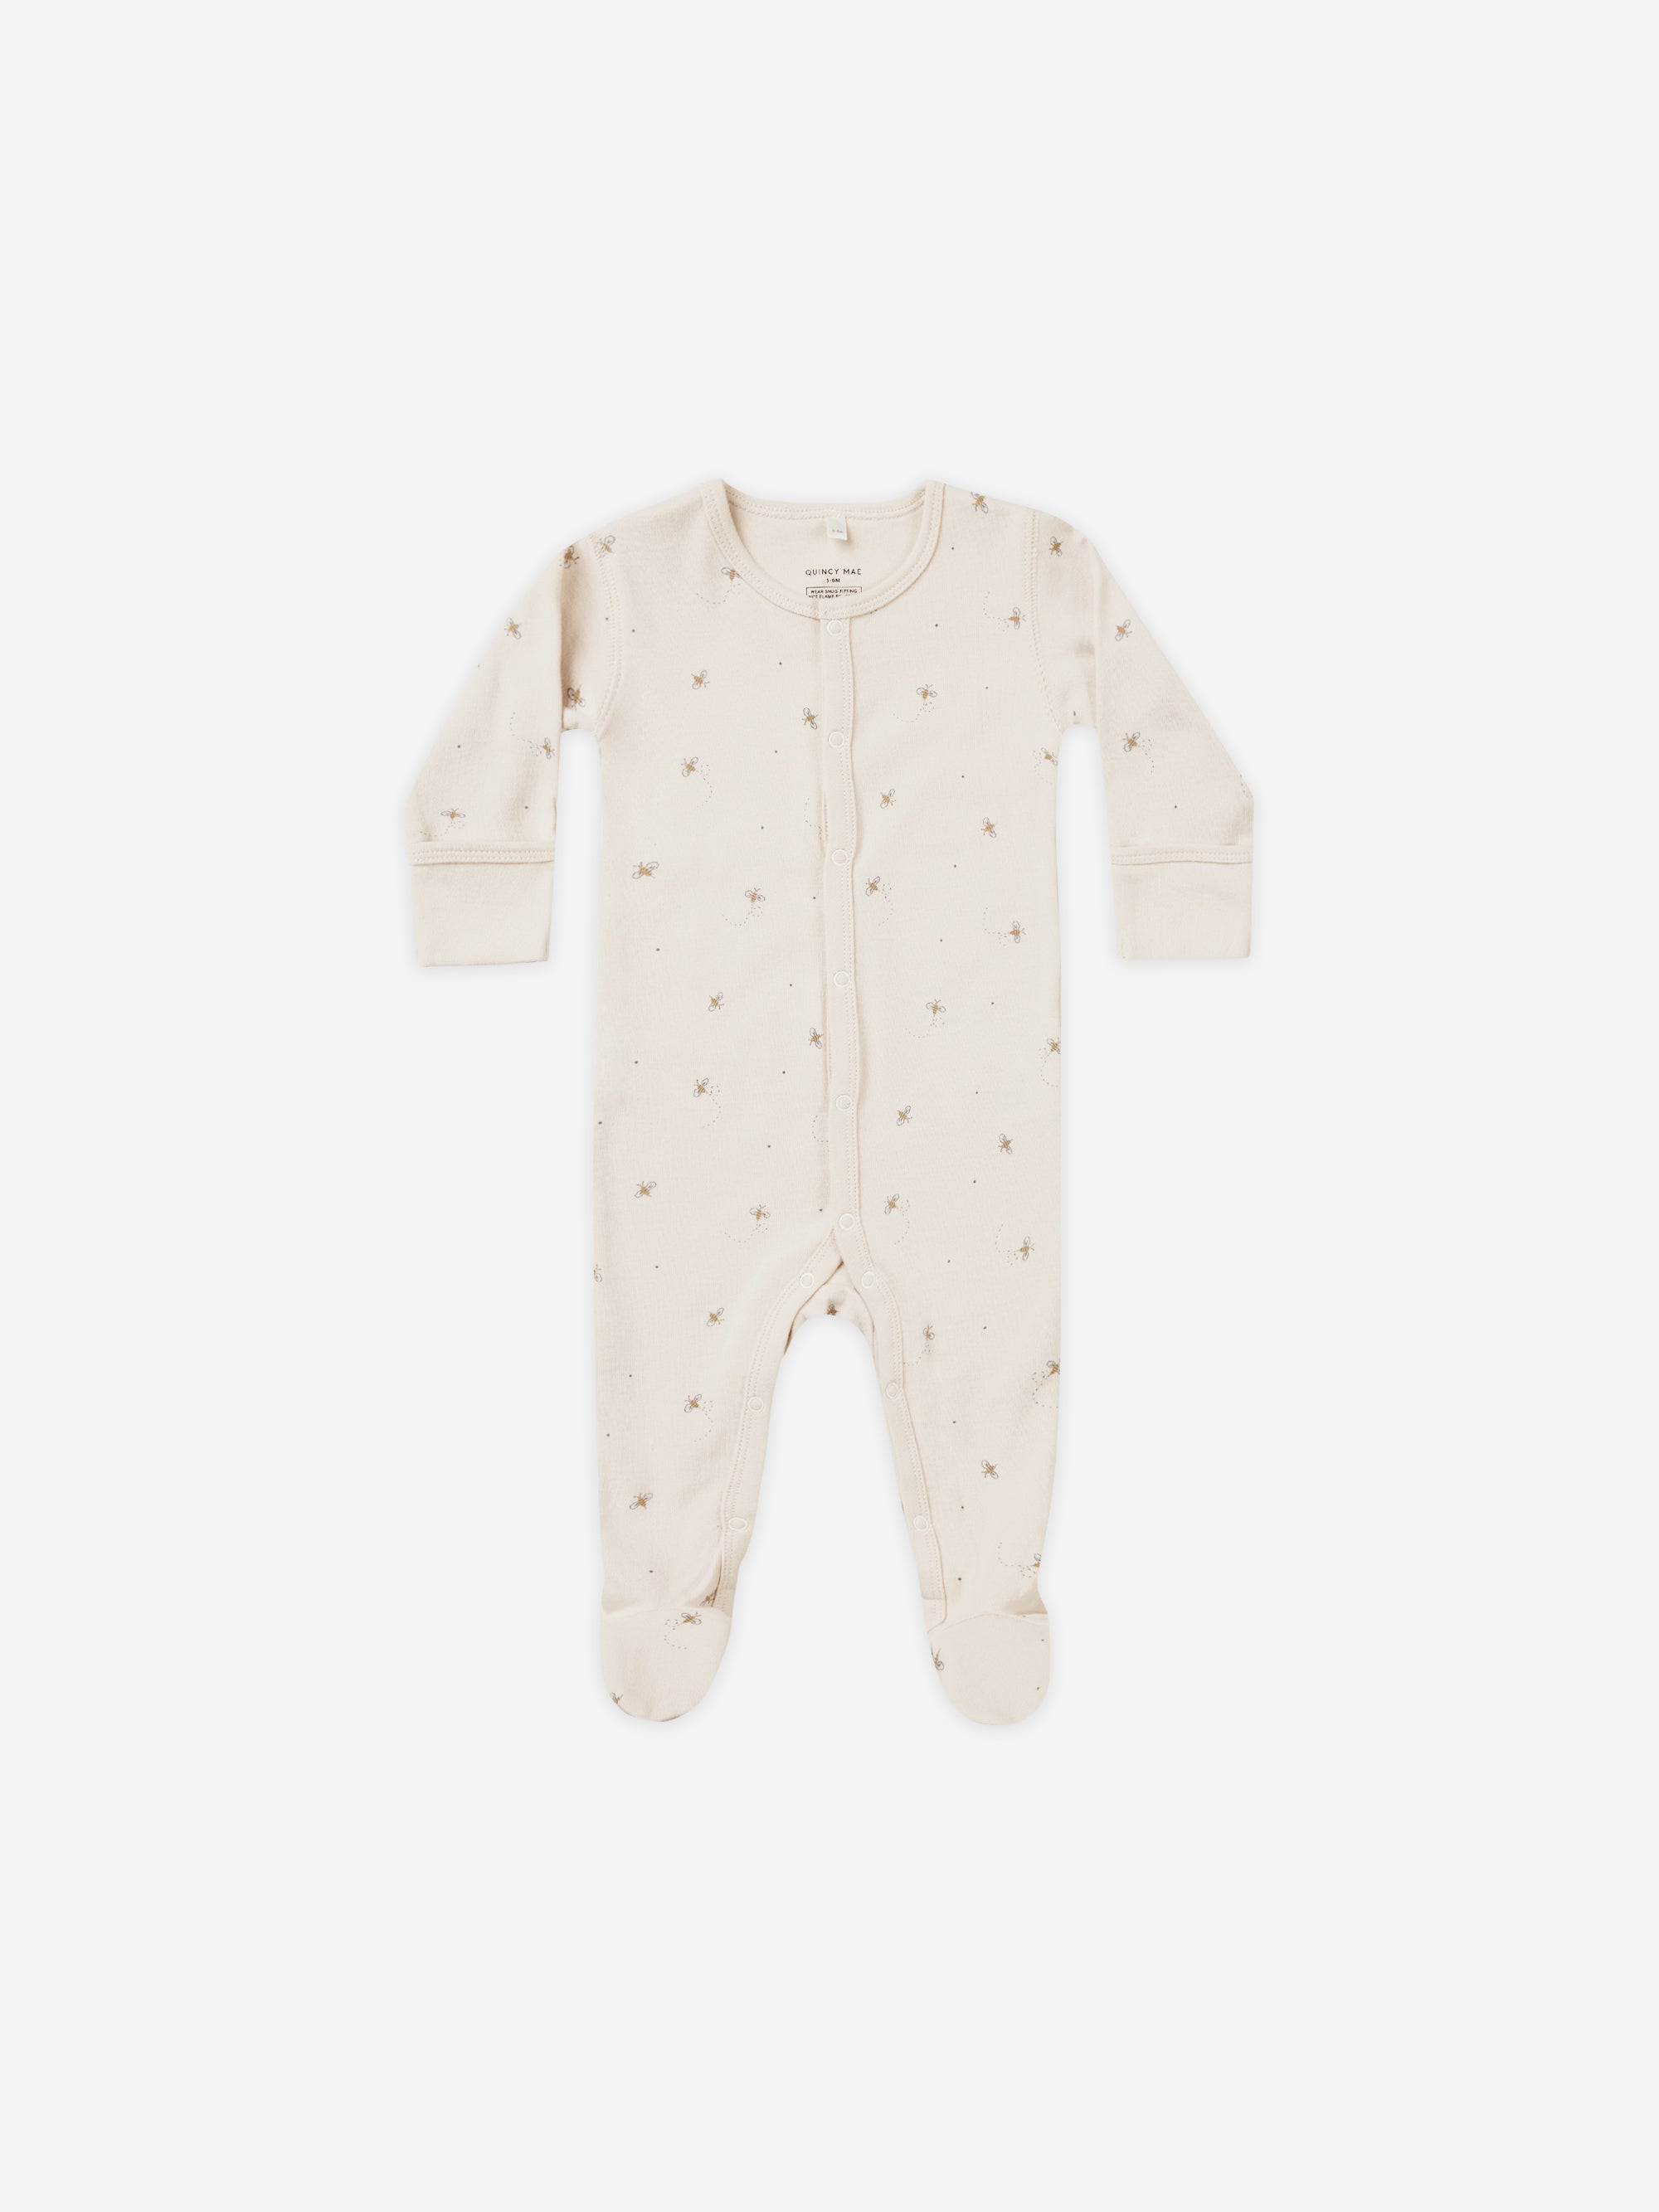 Full Snap Footie || Bees - Rylee + Cru | Kids Clothes | Trendy Baby Clothes | Modern Infant Outfits |